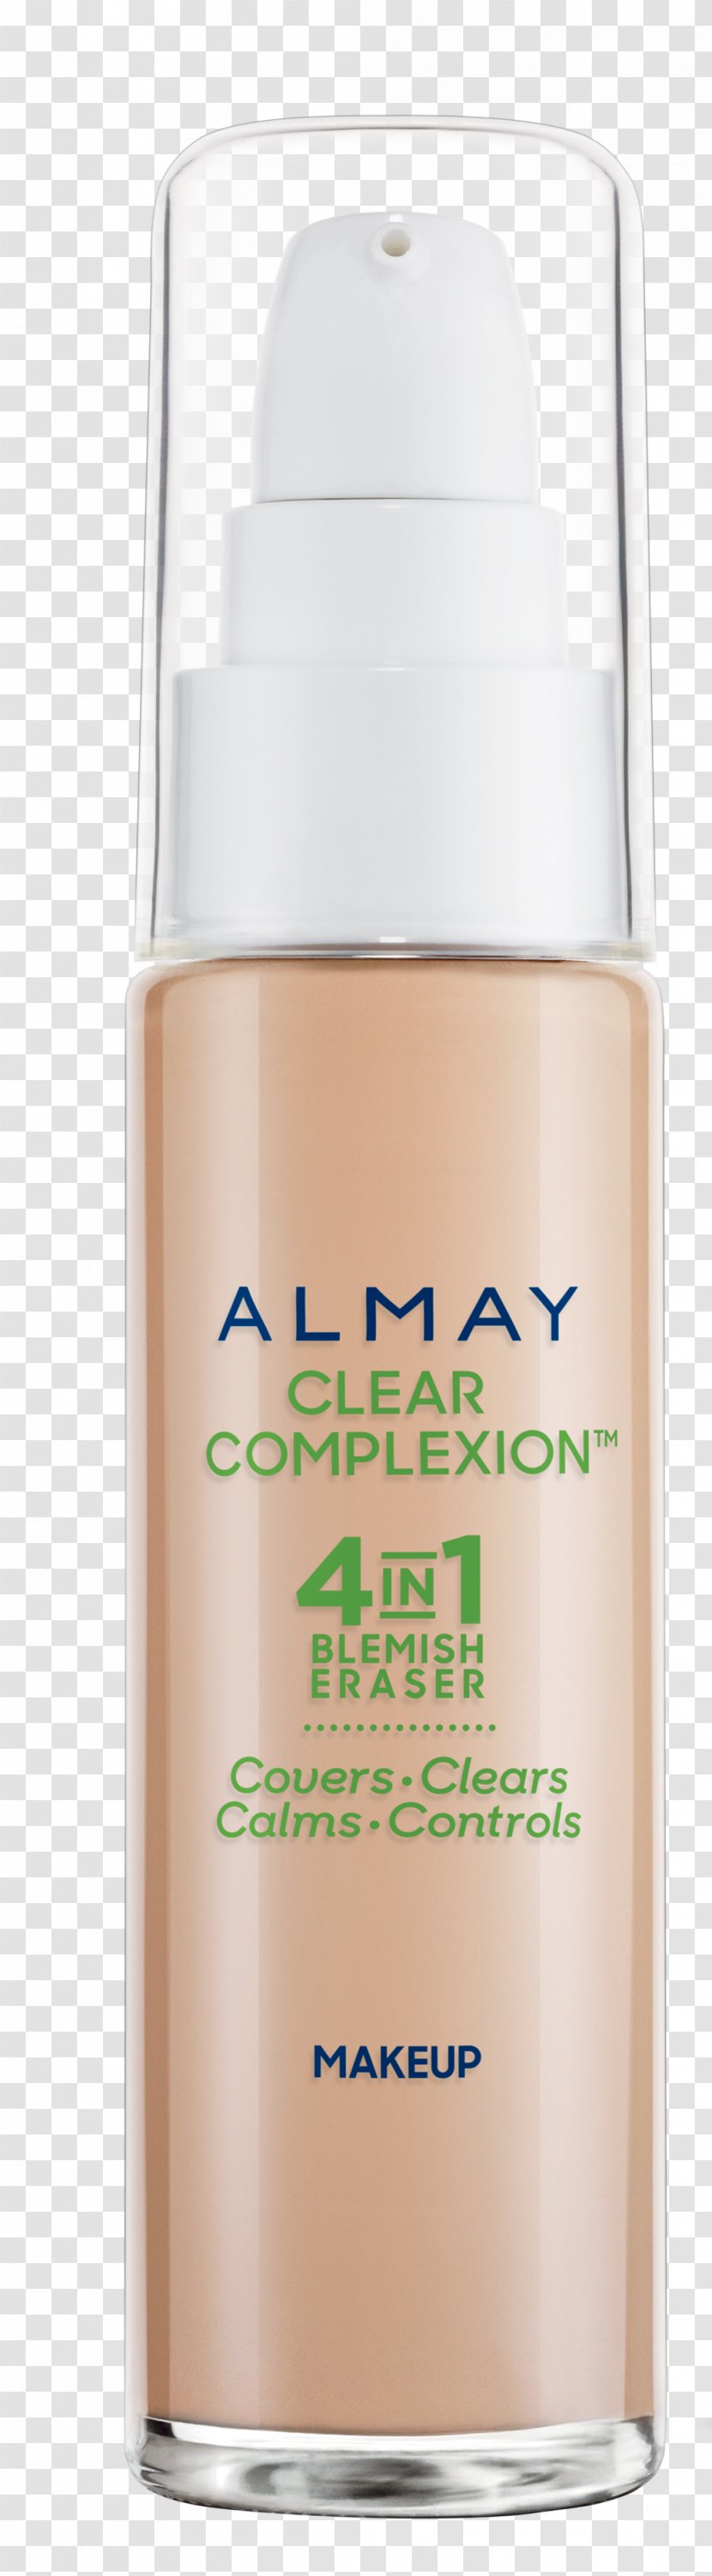 Almay Clear Complexion Makeup Cosmetics Lotion Revlon - Cream - Skin Care Transparent PNG